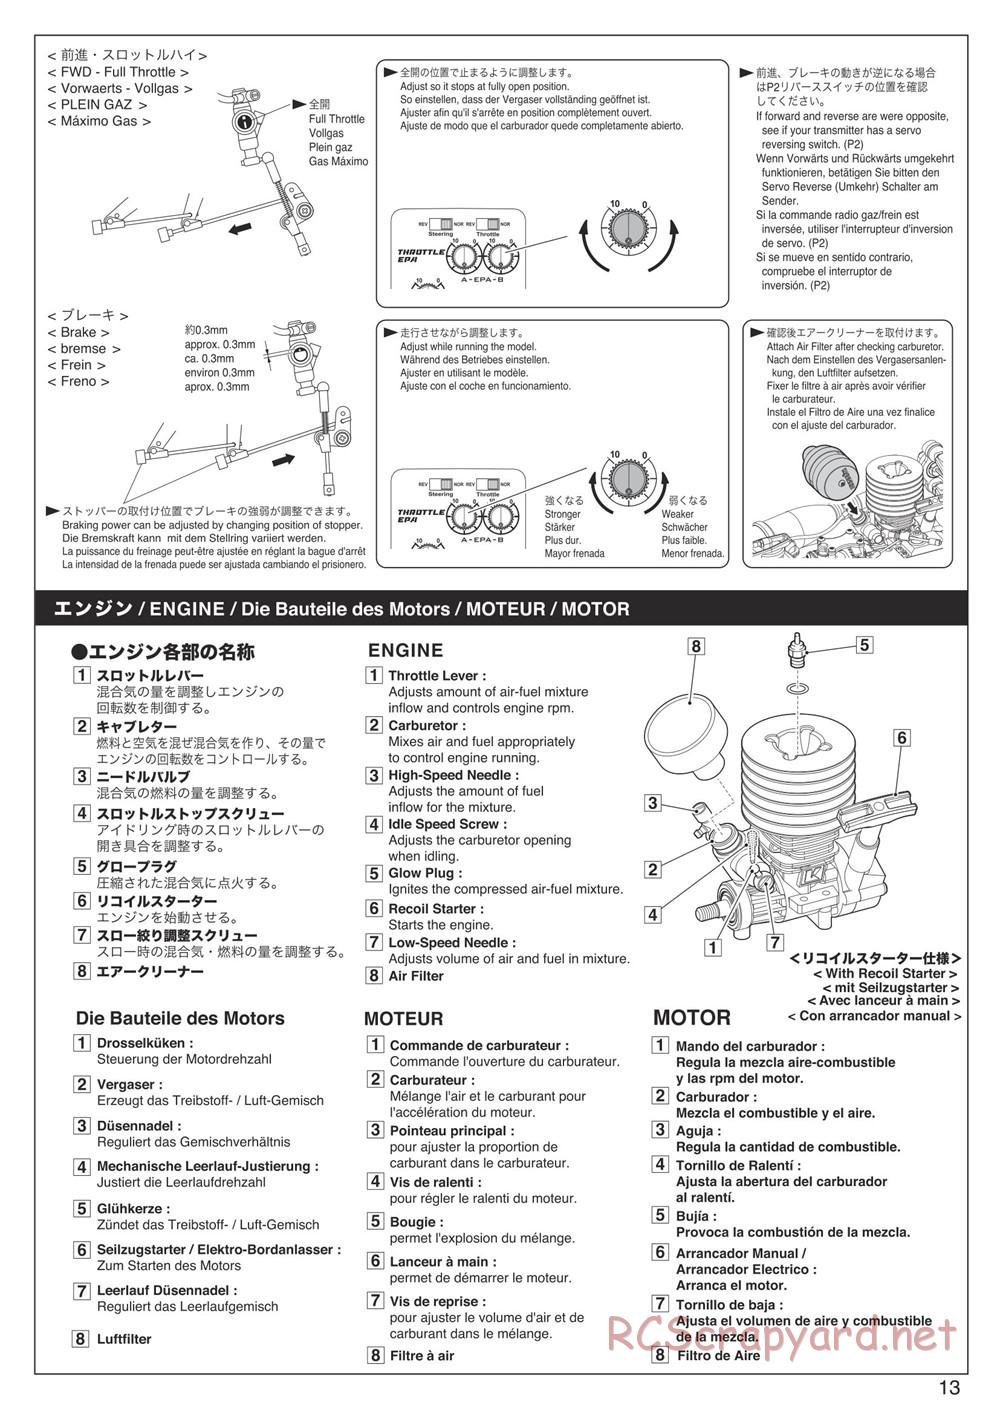 Kyosho - DMT - Manual - Page 13